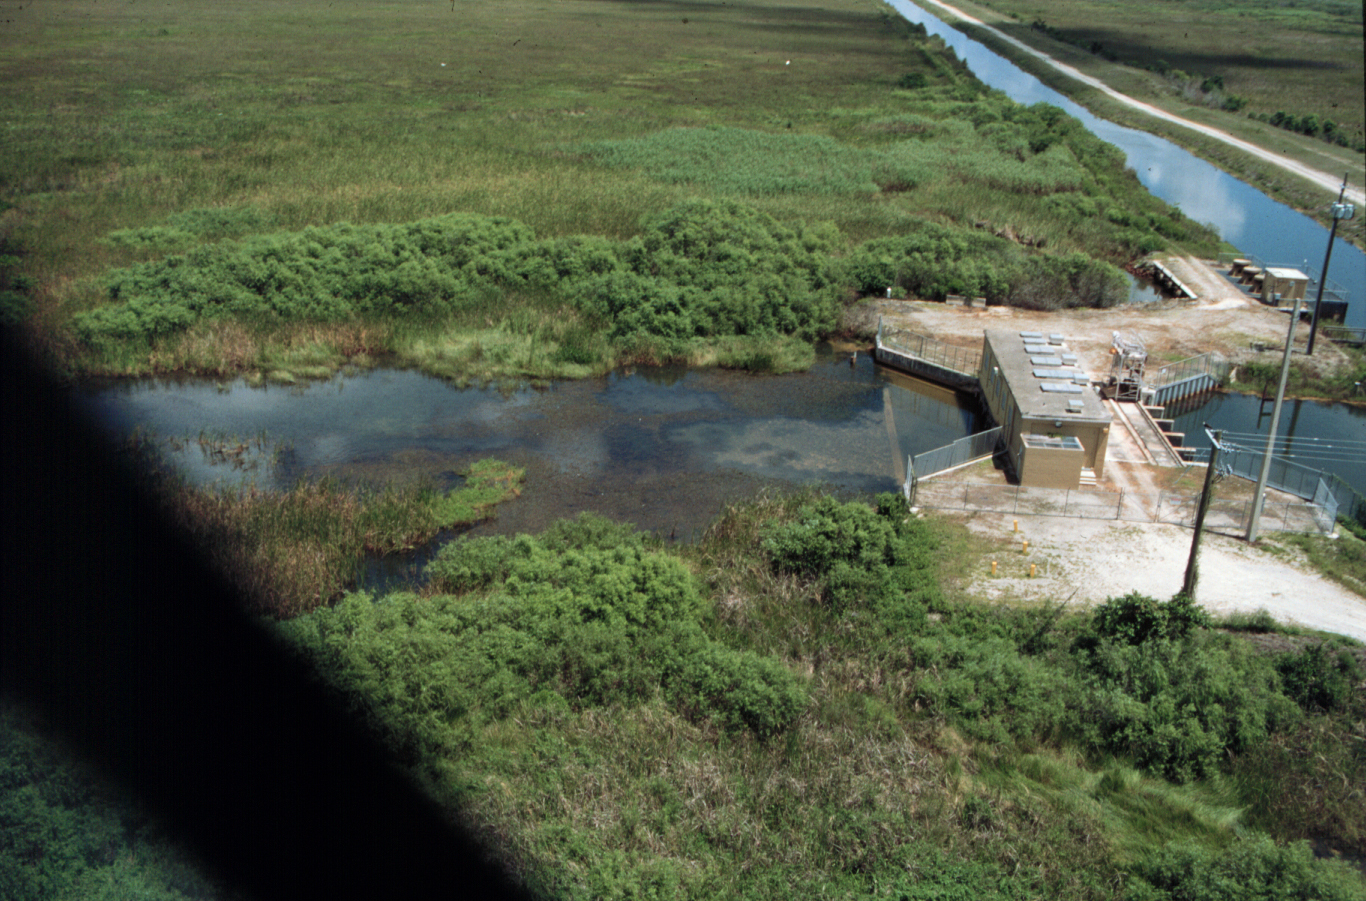 S332 pump station, south of TS/Ph-1 in Taylor Slough